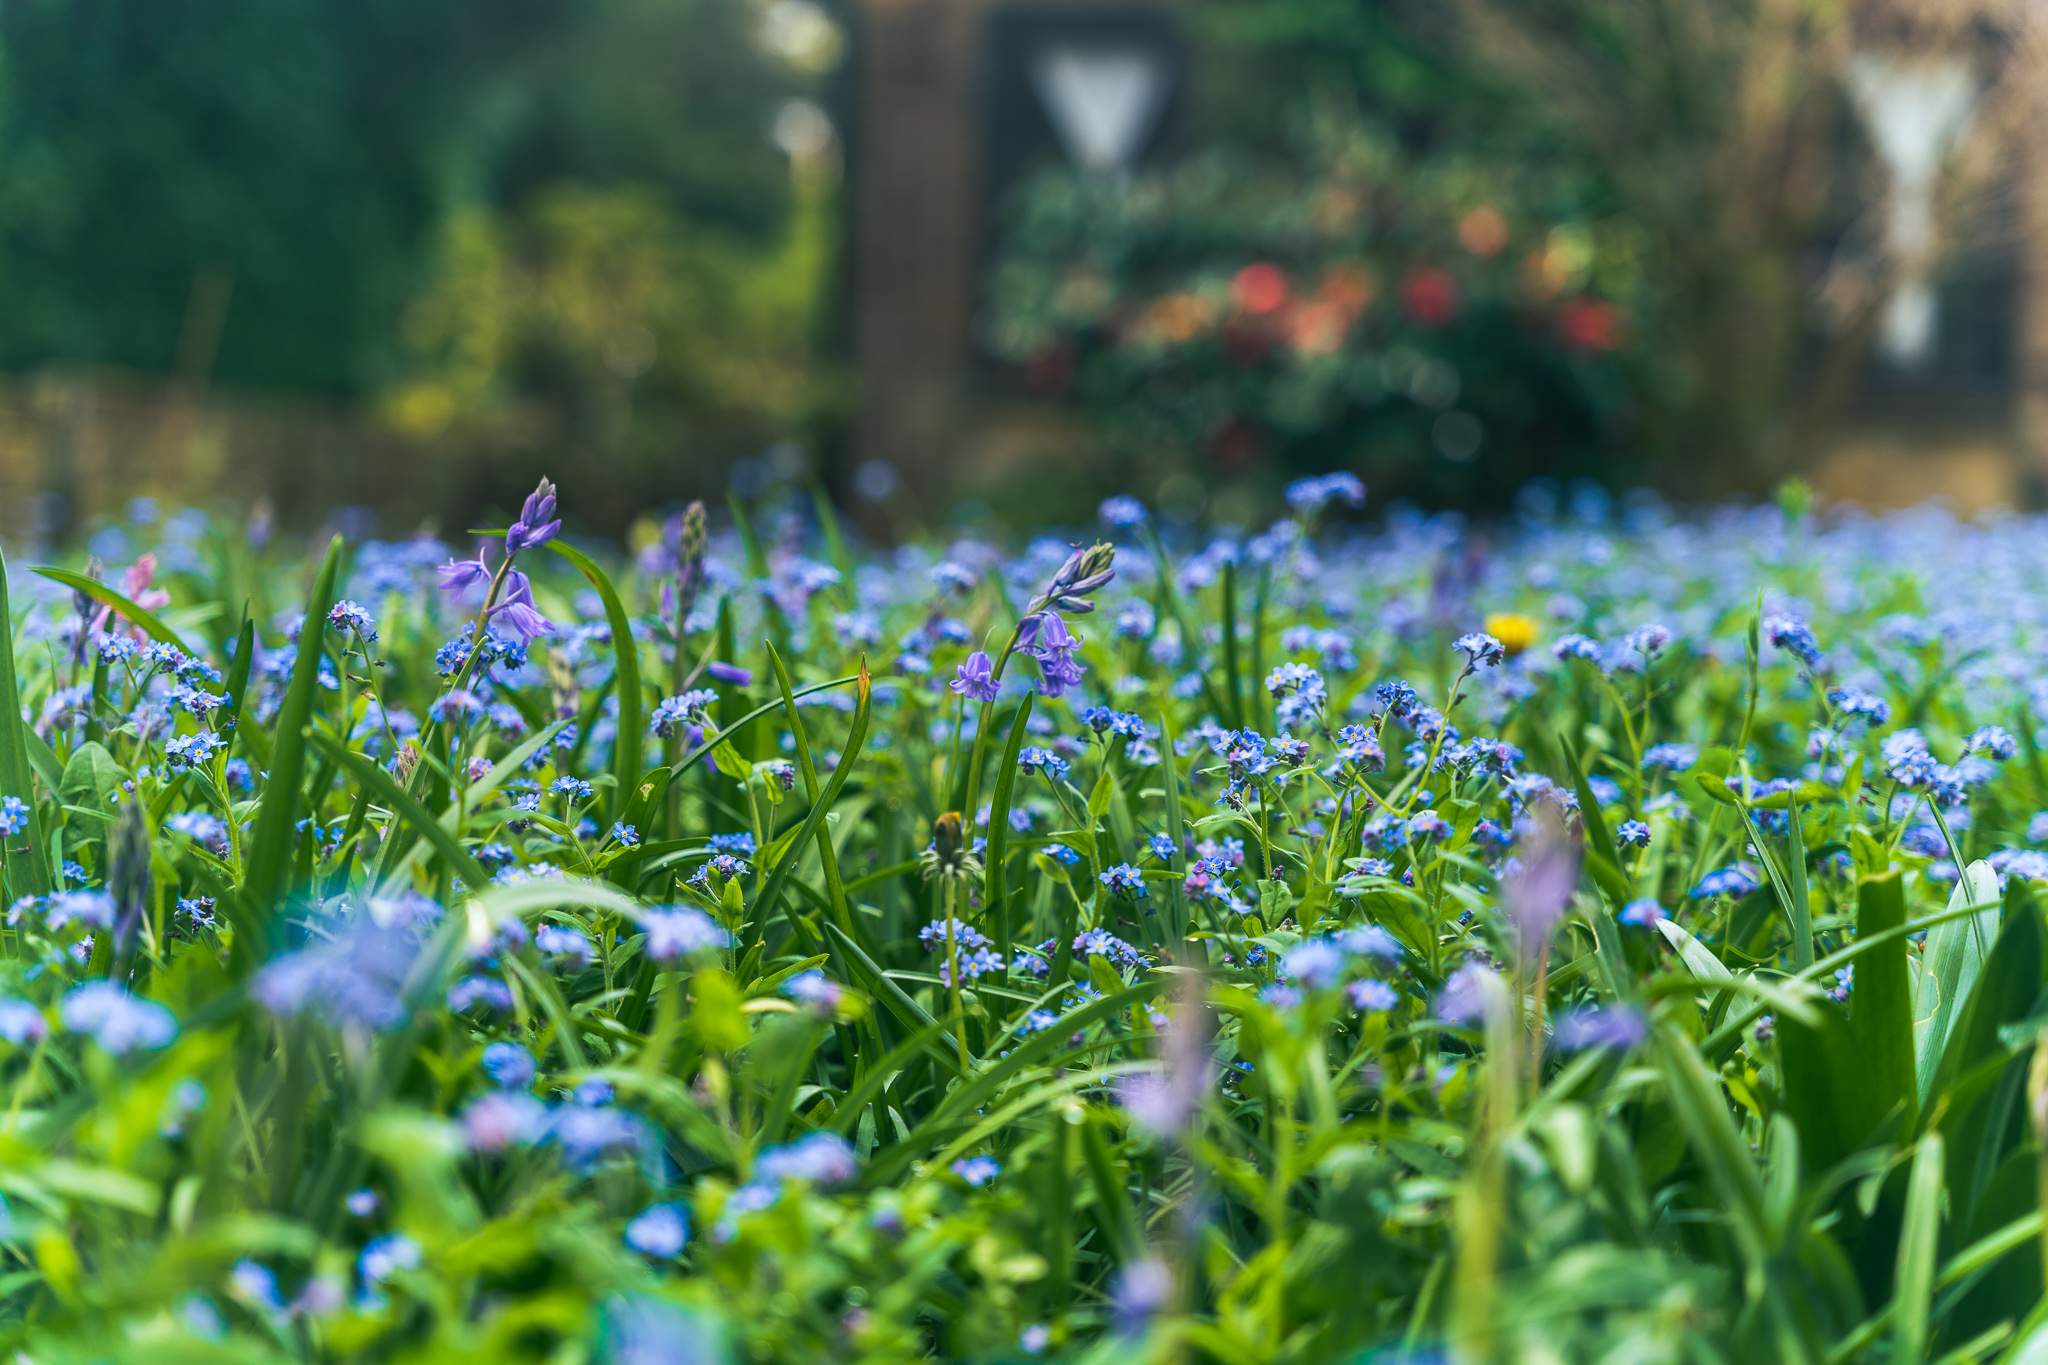 Its spring in full season! A field of Forget-Me-Not flowers was blooming in someone's backyard